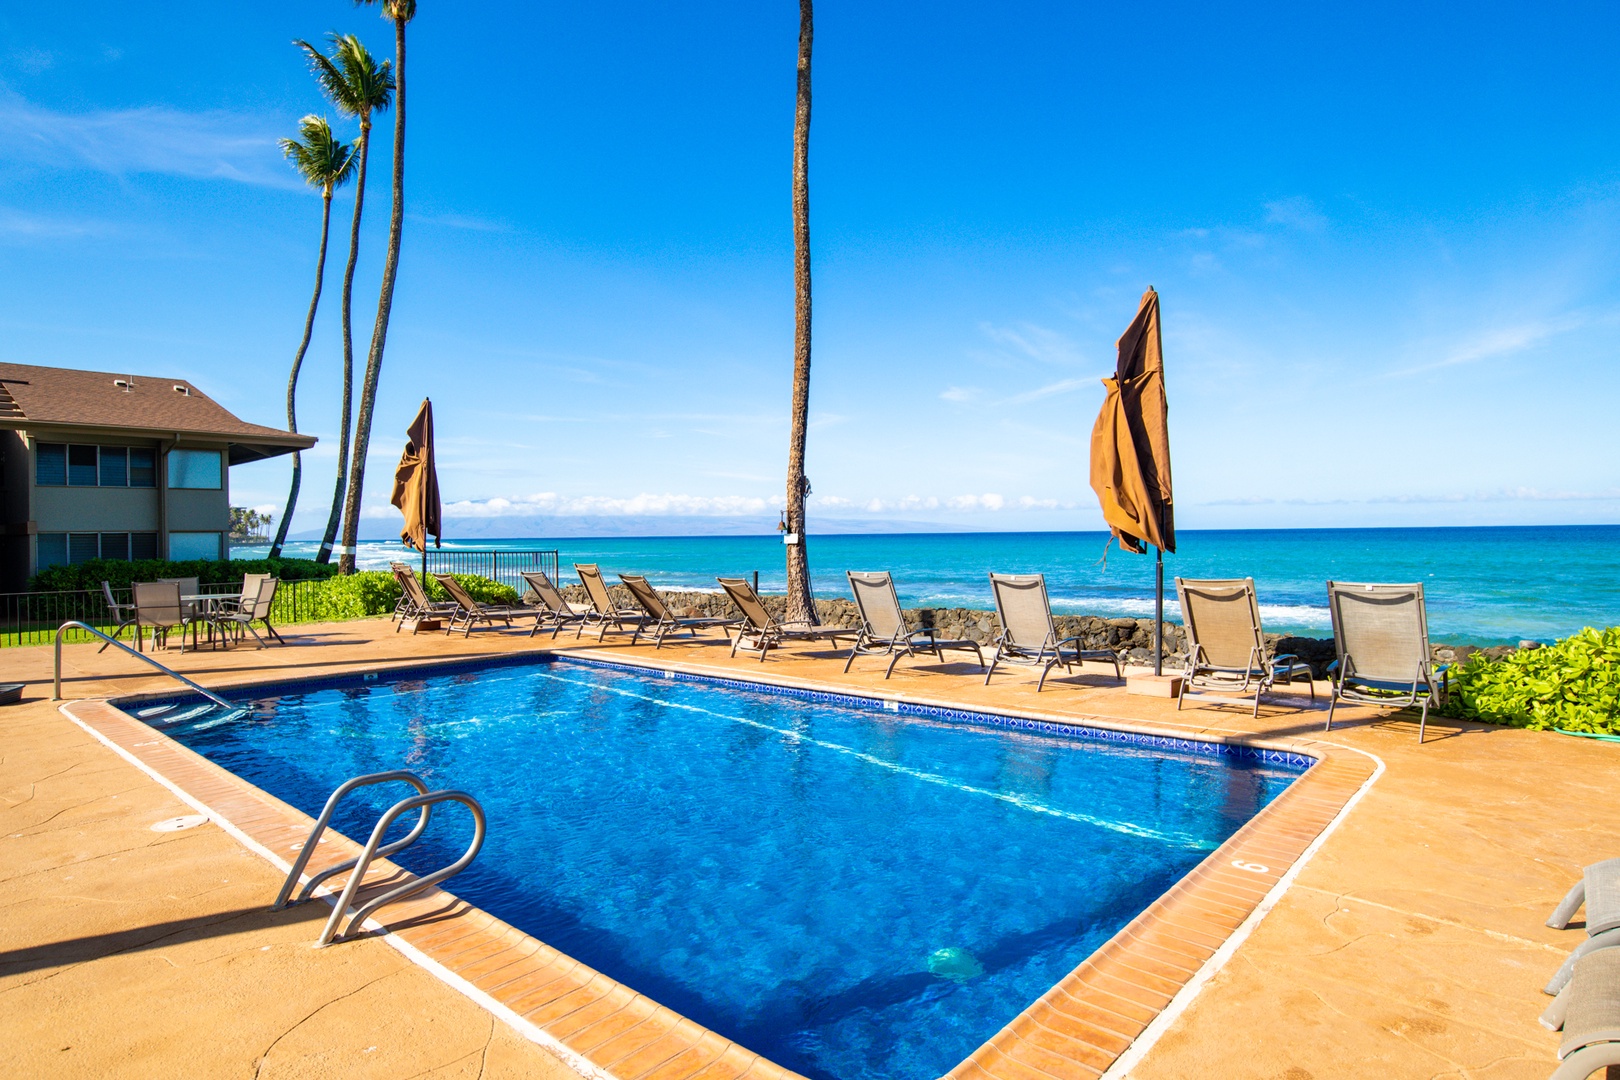 Lahaina Vacation Rentals, Hale Kai 109 - Expansive views from the pool